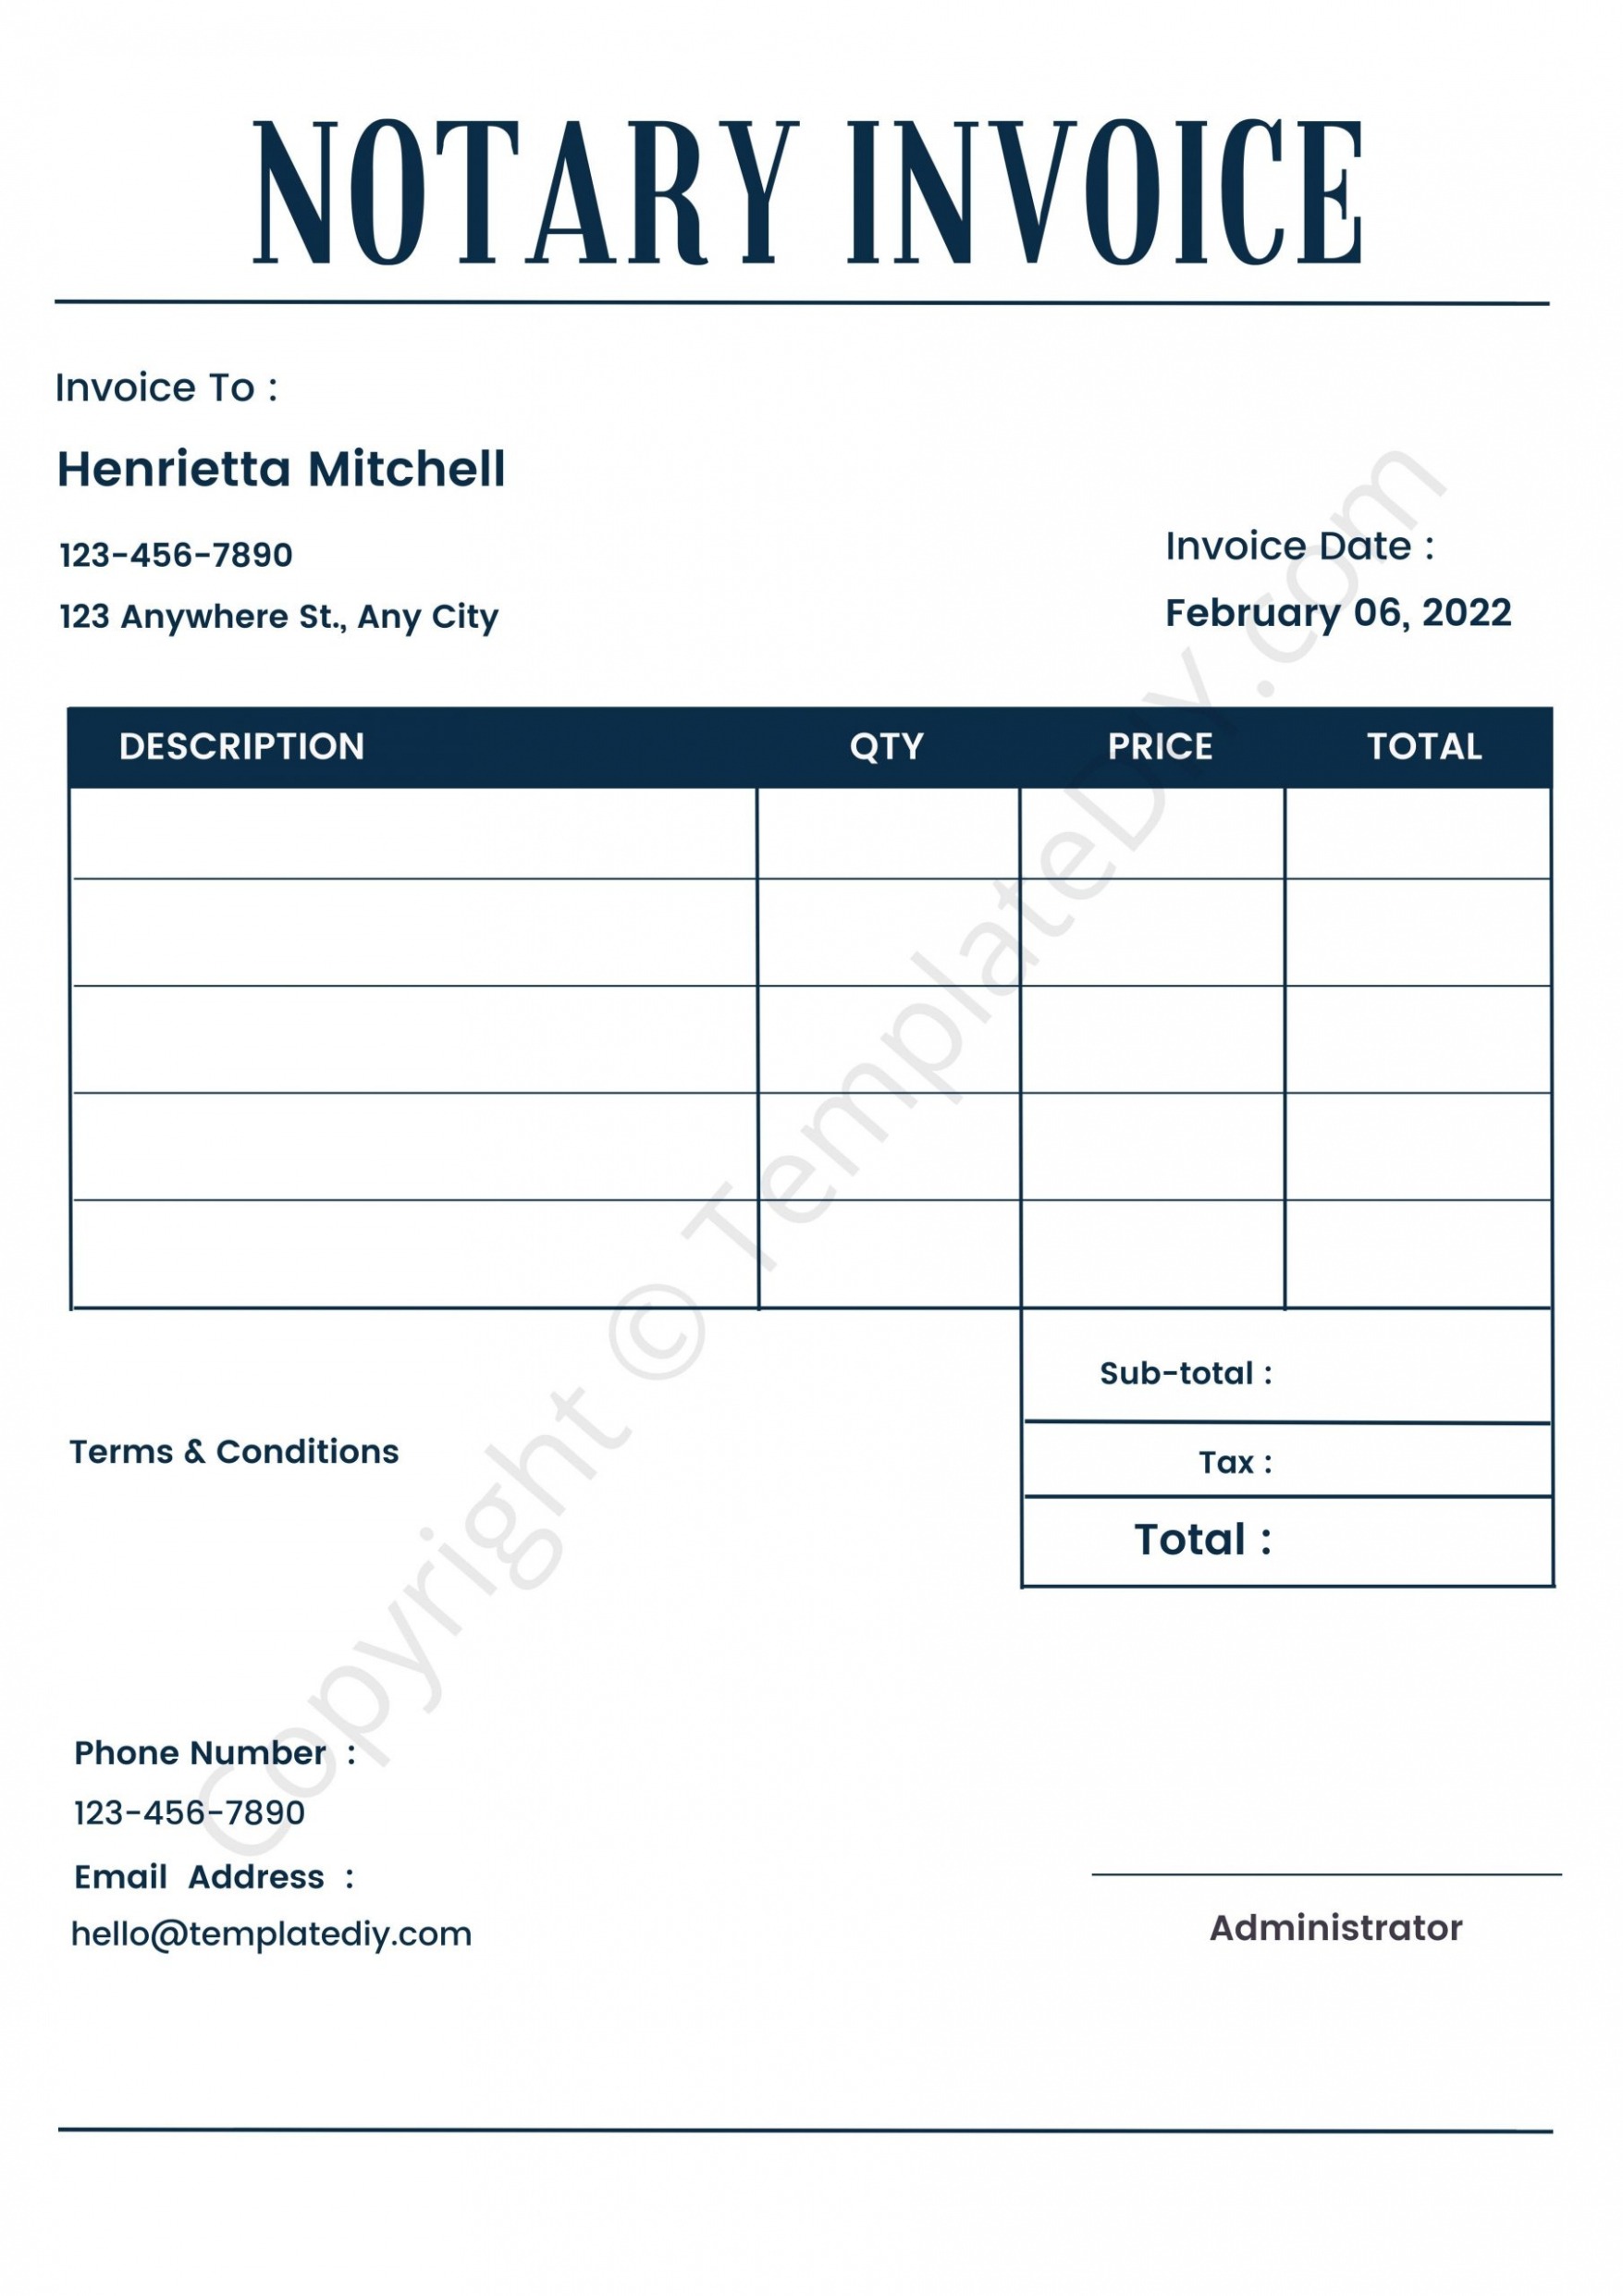 Sample Notary Invoice Template Free Doc